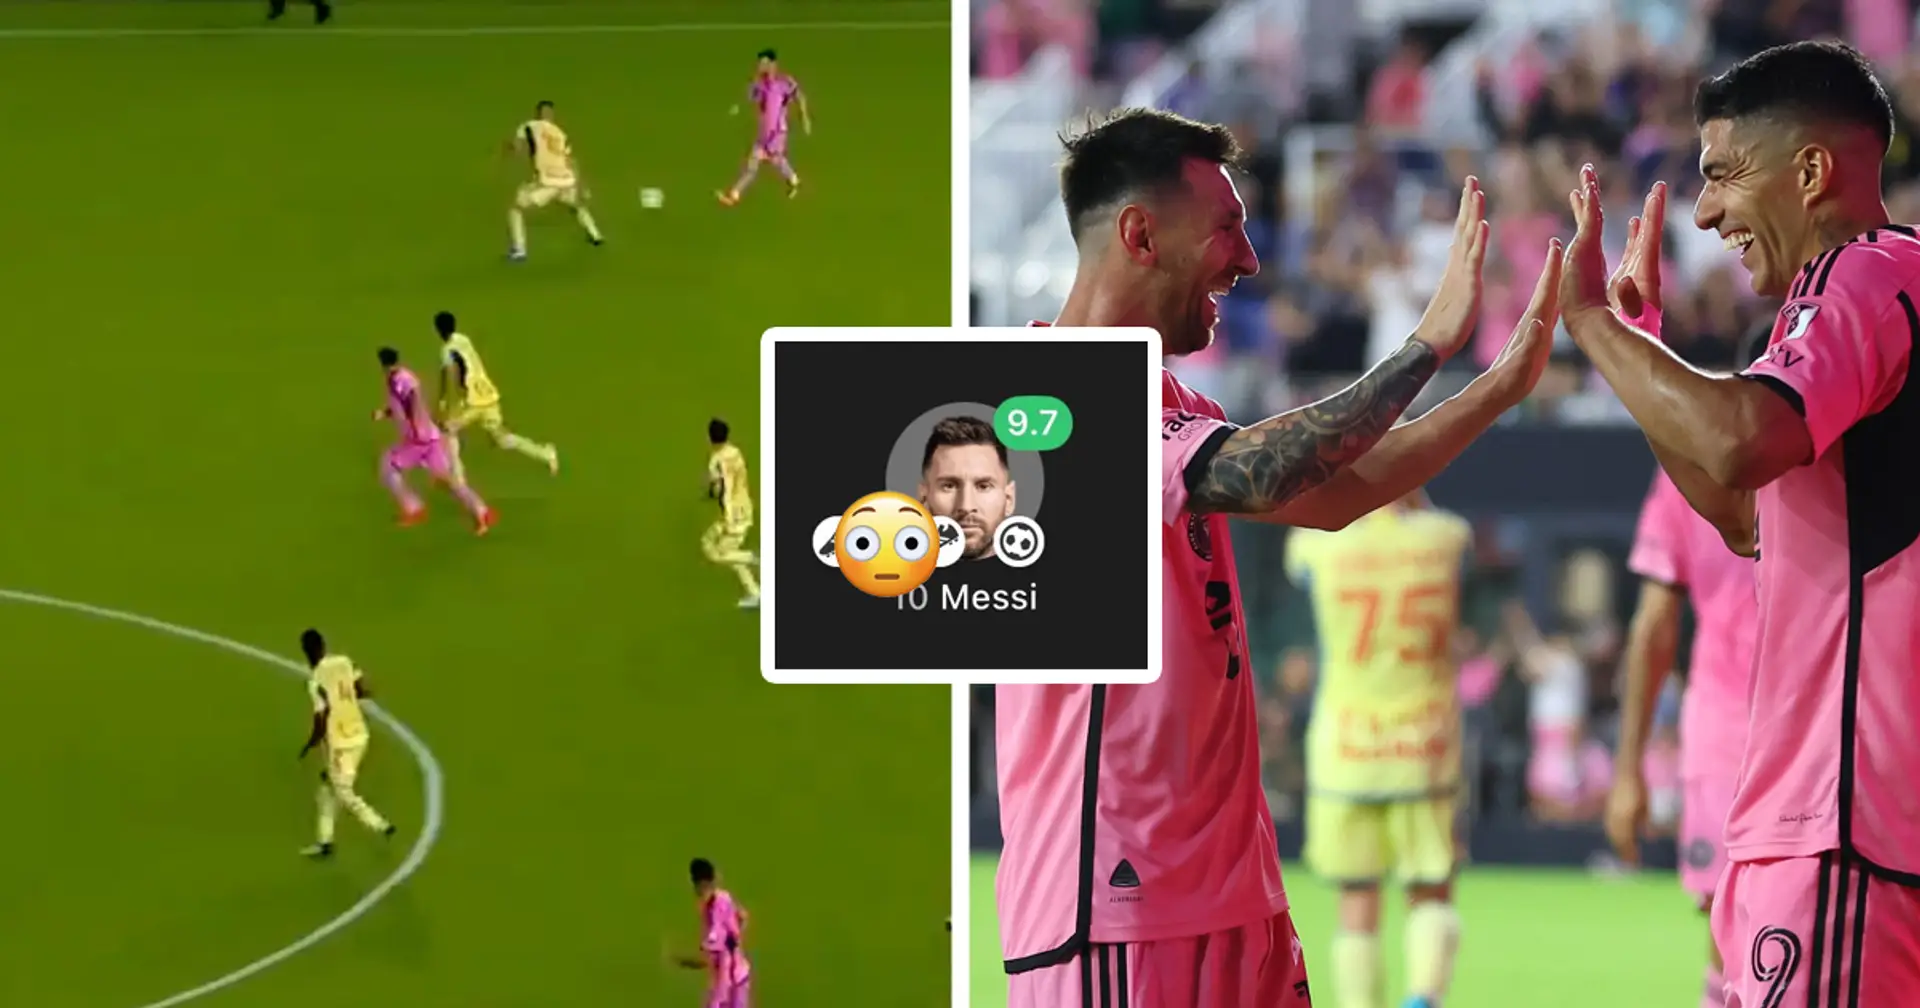 Lionel Messi sets record for assists in one game - three of them to Luis Suarez